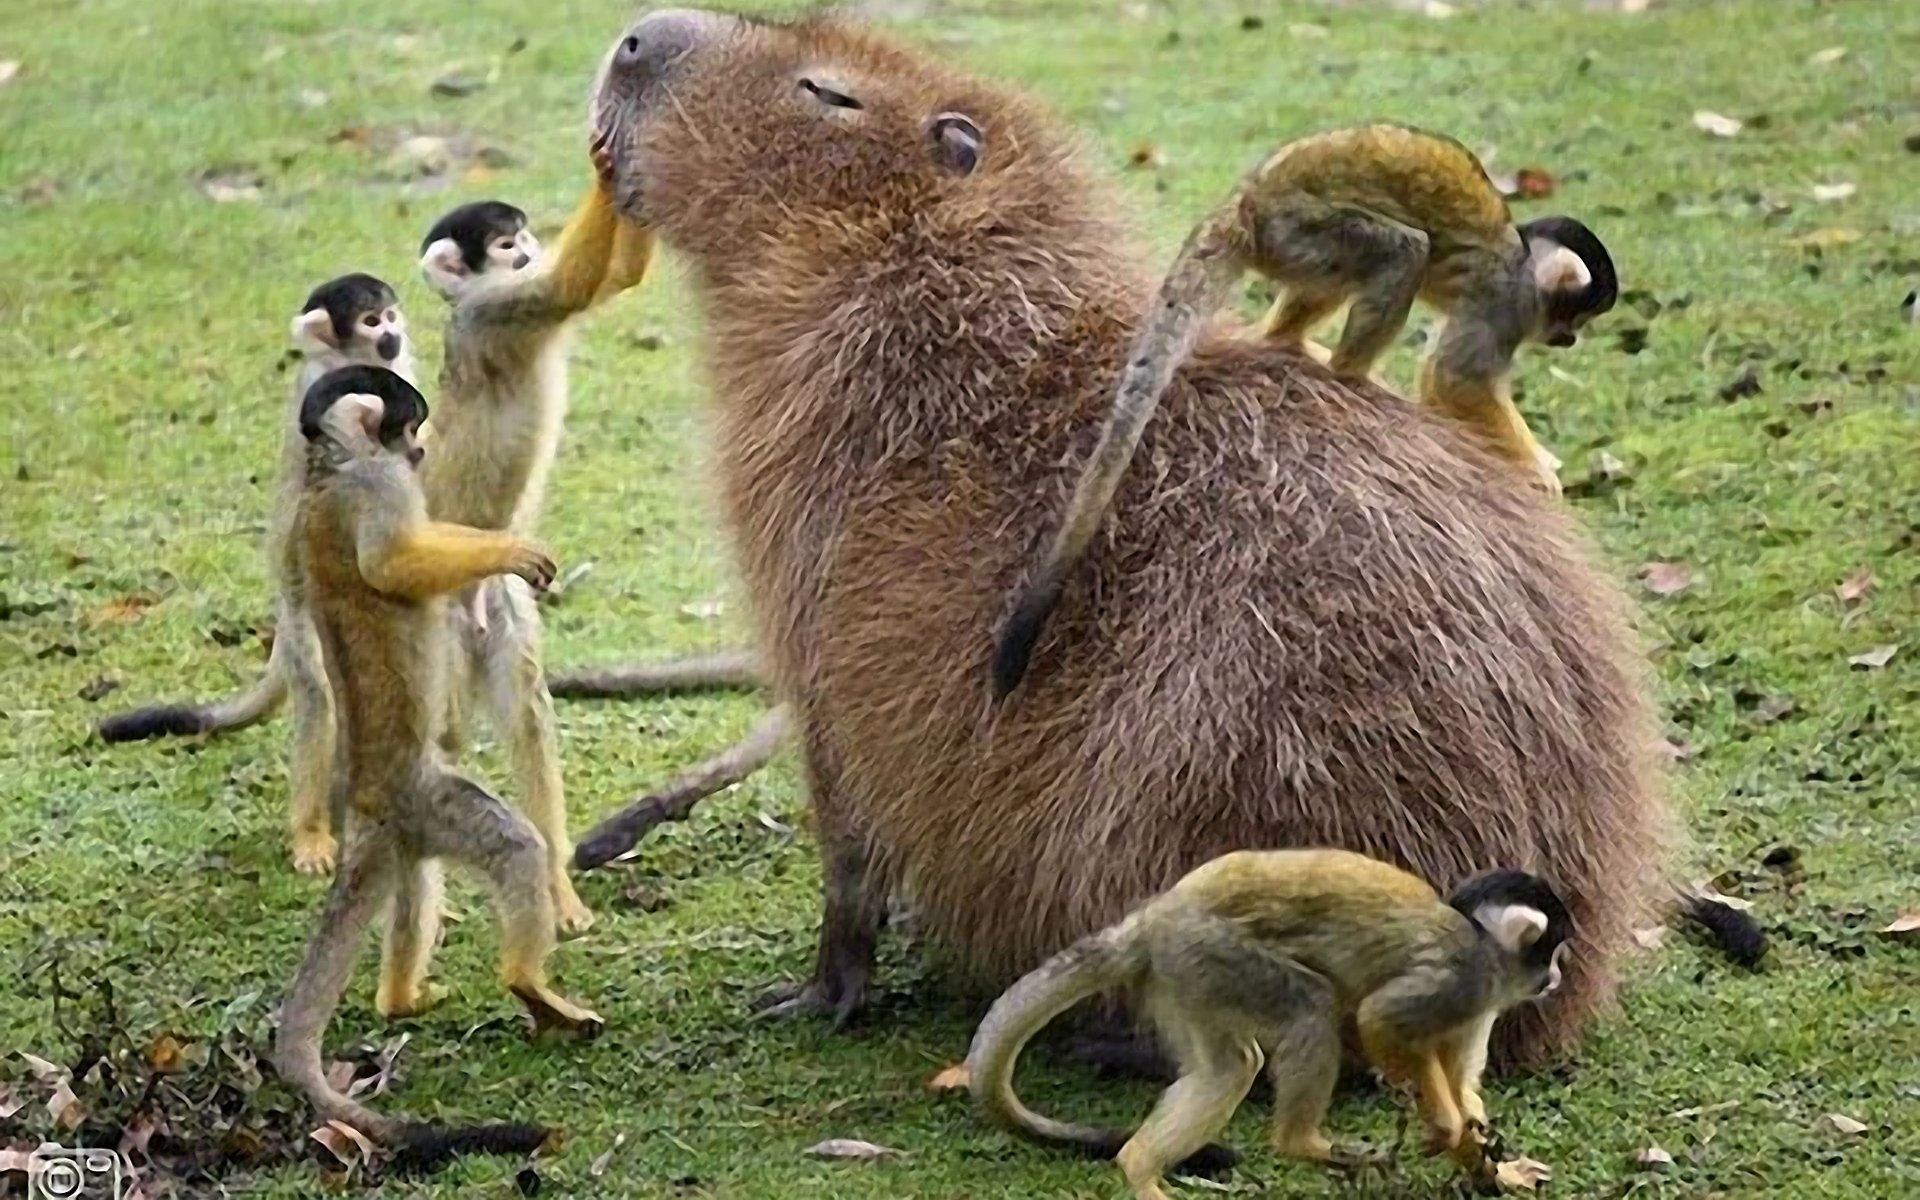 Capybara wallpapers, Cute animals, Adorable rodents, High-quality backgrounds, 1920x1200 HD Desktop